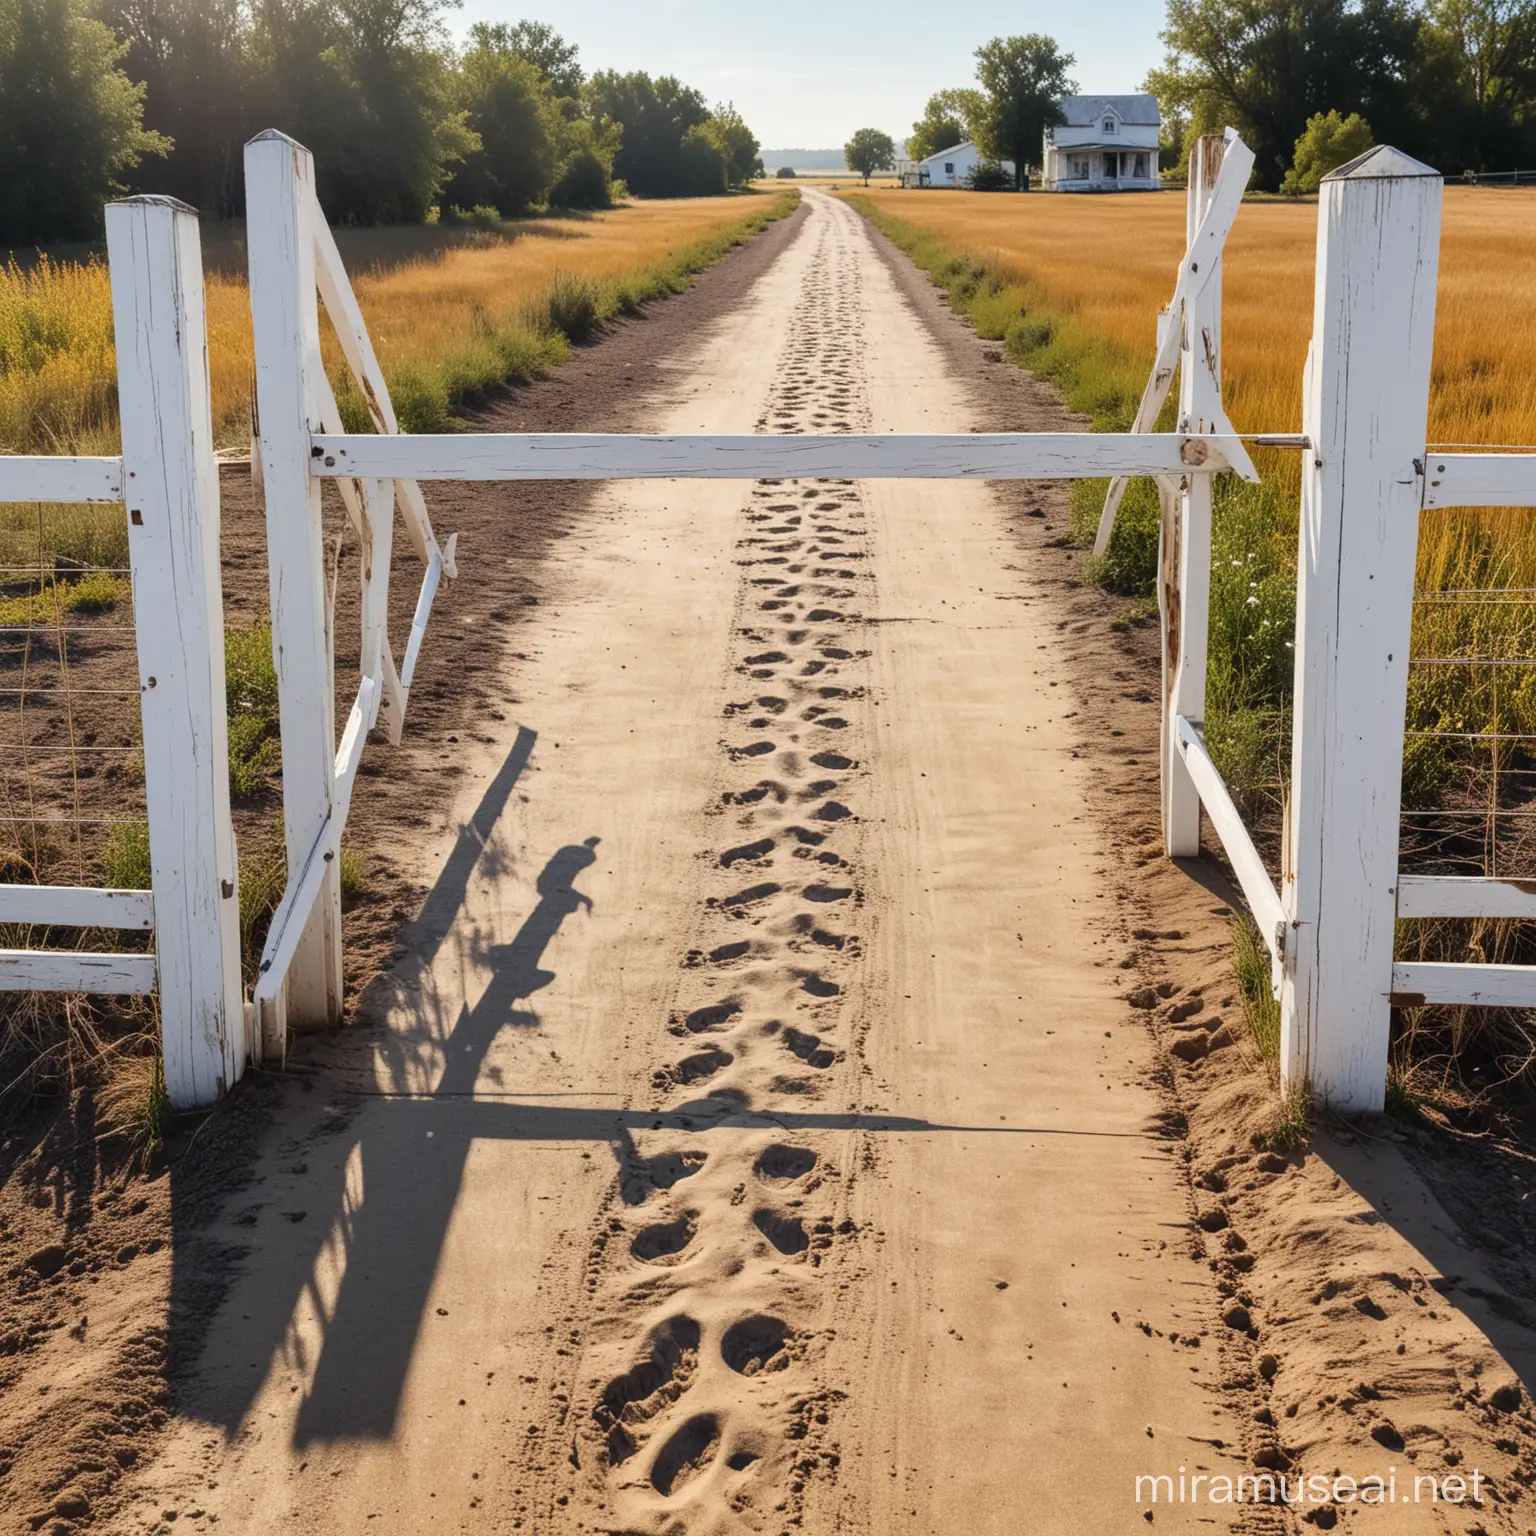  magical whispy  painting of horse tracks and boot tracks on a dirt road near an open white wooden  farm gate